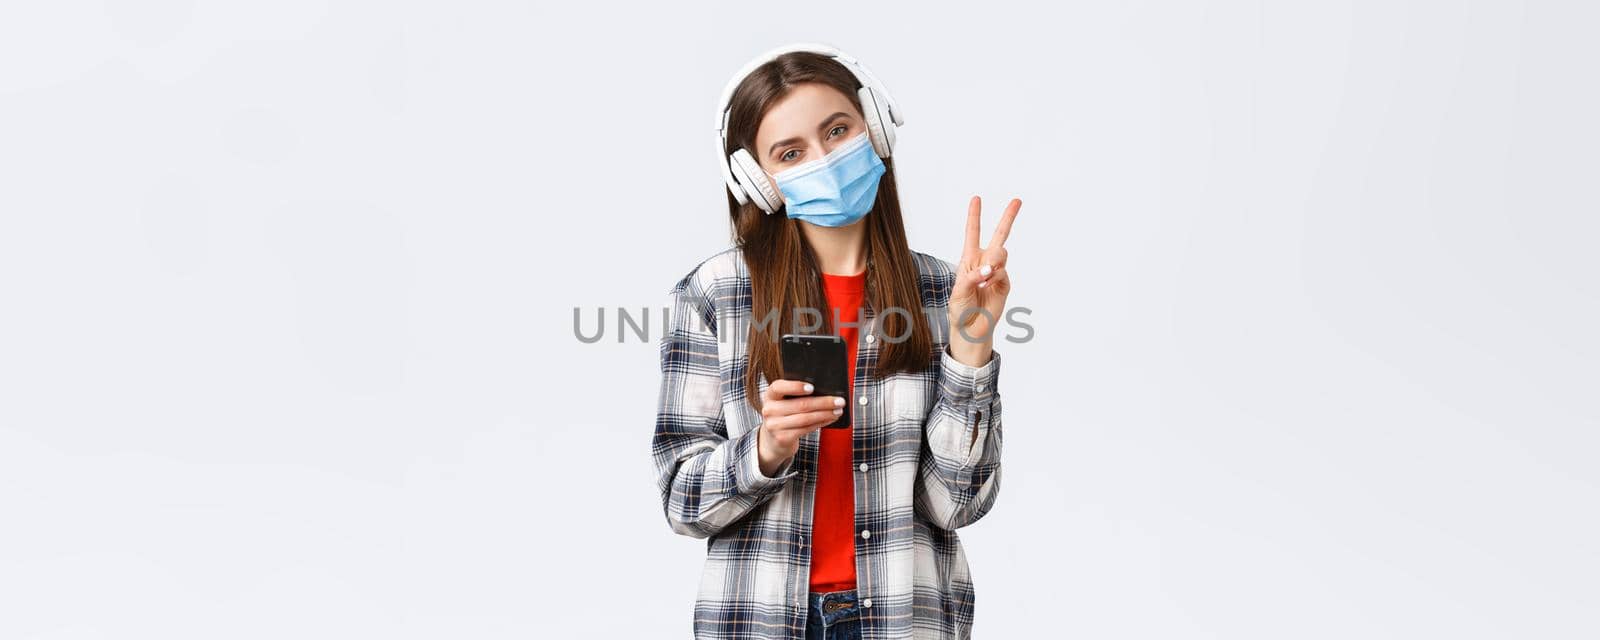 Social distancing, leisure and lifestyle on covid-19 outbreak, coronavirus concept. Cute silly teenage girl in medical mask and headphones, show peace sign, relaxing with music, hold mobile phone.